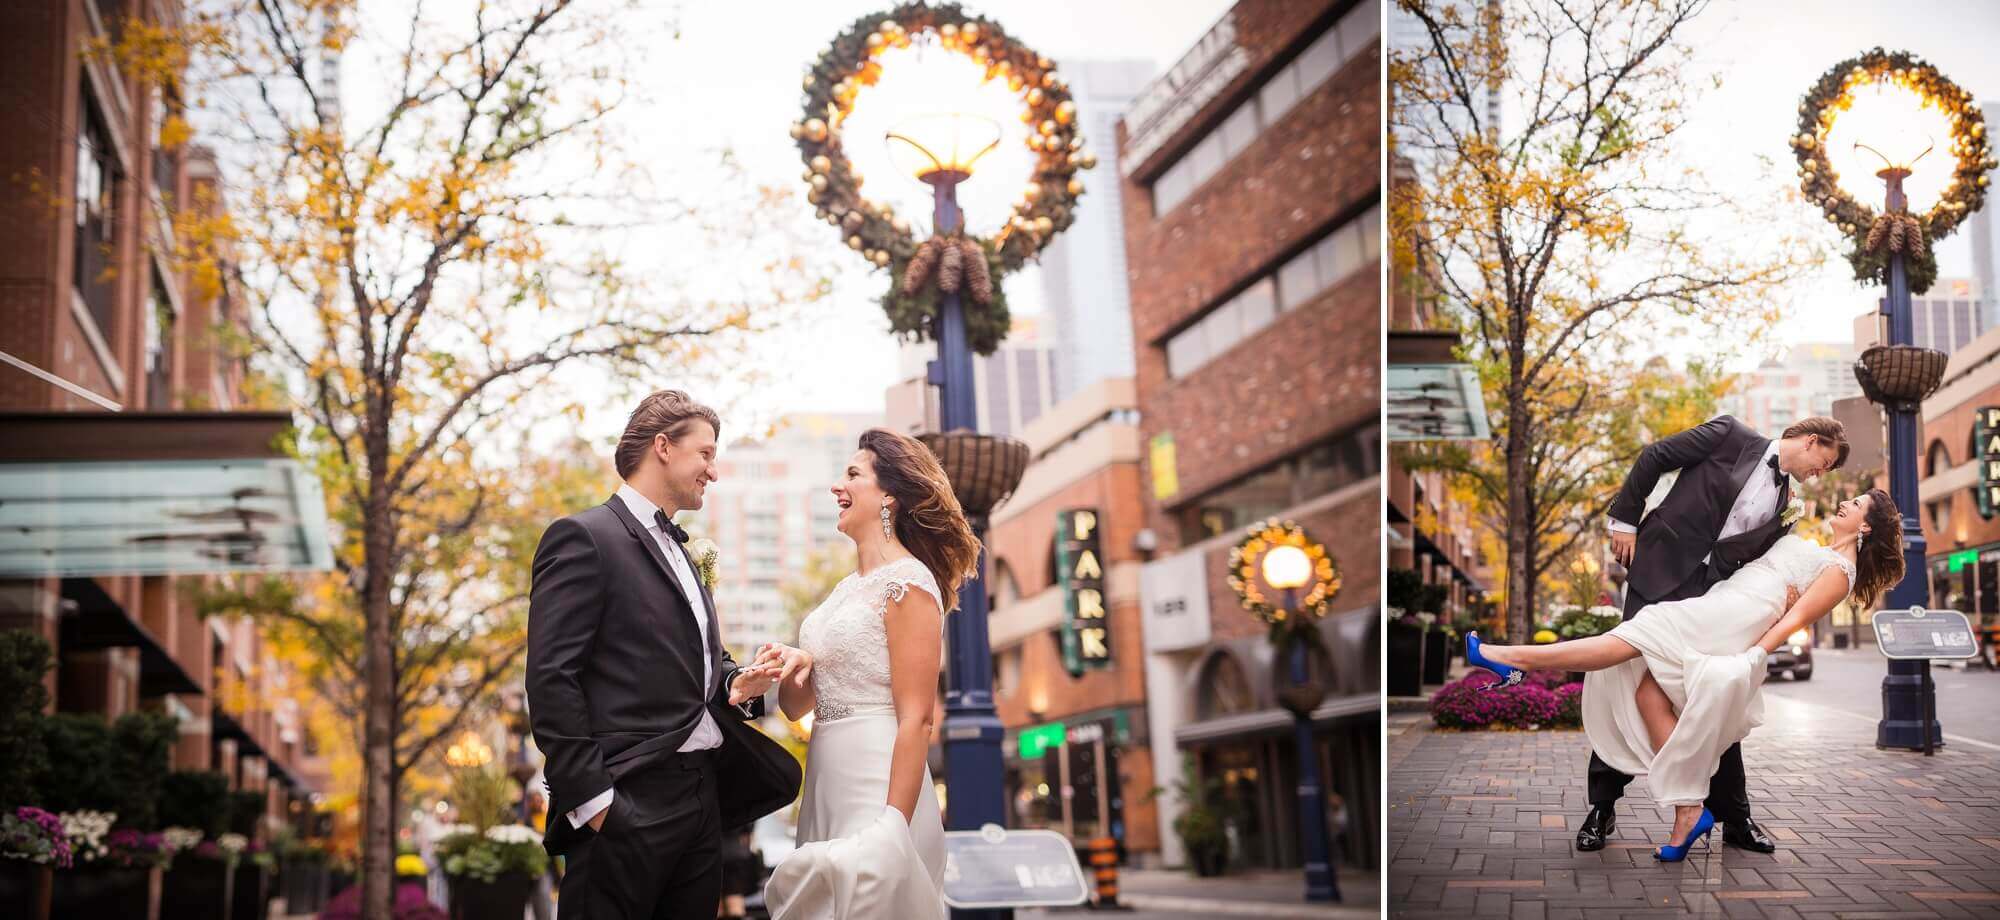 City portraits of the groom dipping his bride in Yorkville, Toronto